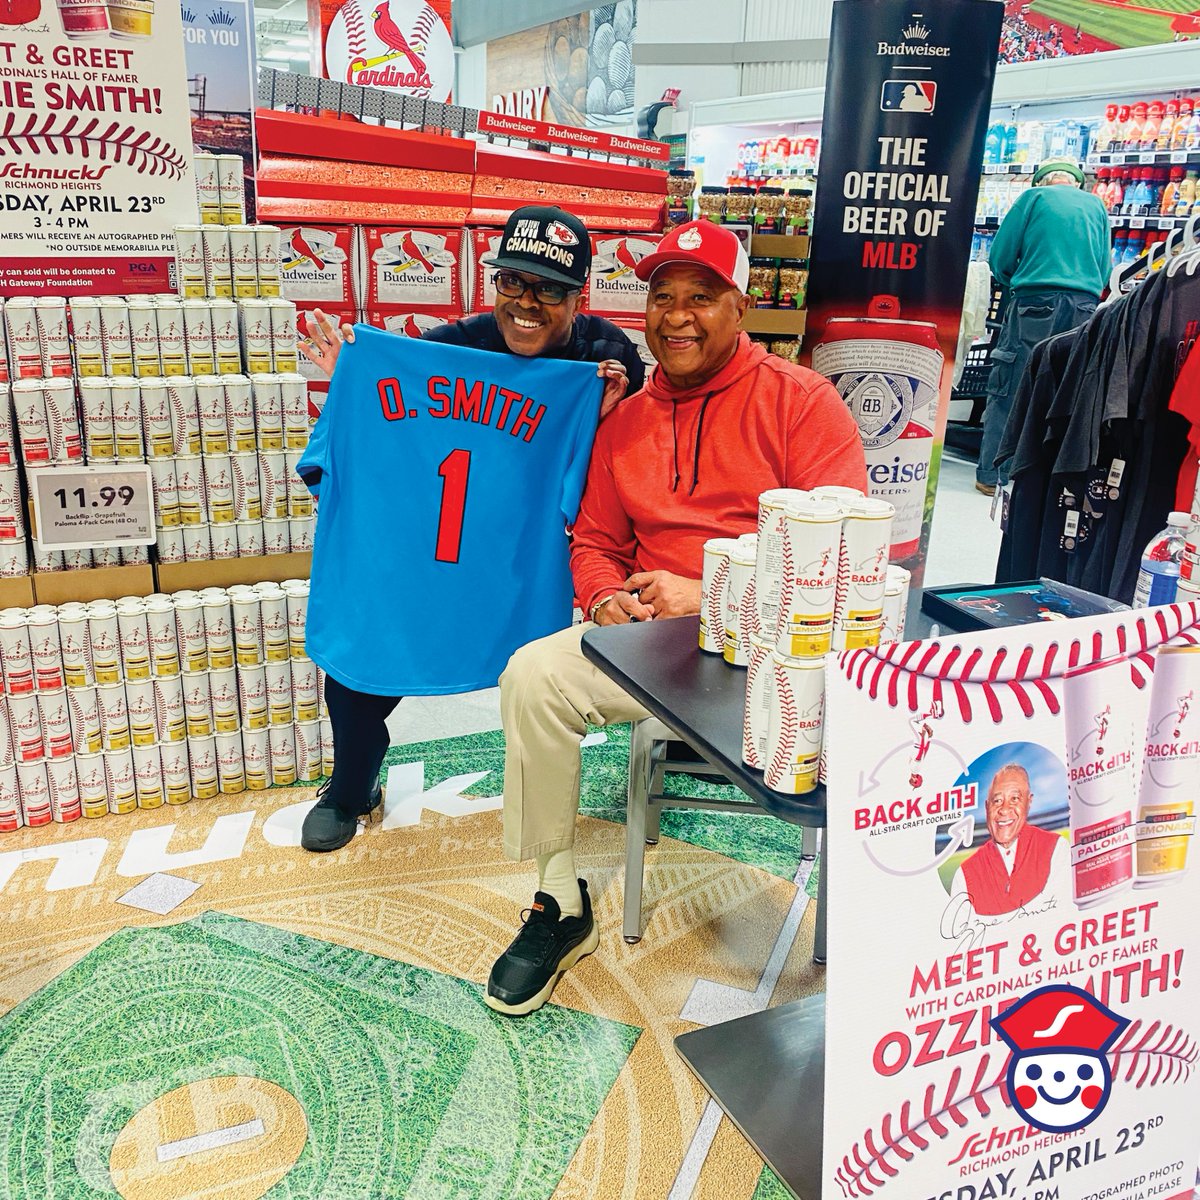 ⚾️ Memories made at Schnucks Richmond Center with the legend himself, @STLWizard! Thank you to all who joined us for autographs. 👏👏

The new BackFLIP Cocktails from Ozzie Smith are available now at Schnucks! 🍒🍋 Flavors: Cherry Lemonade & Paloma